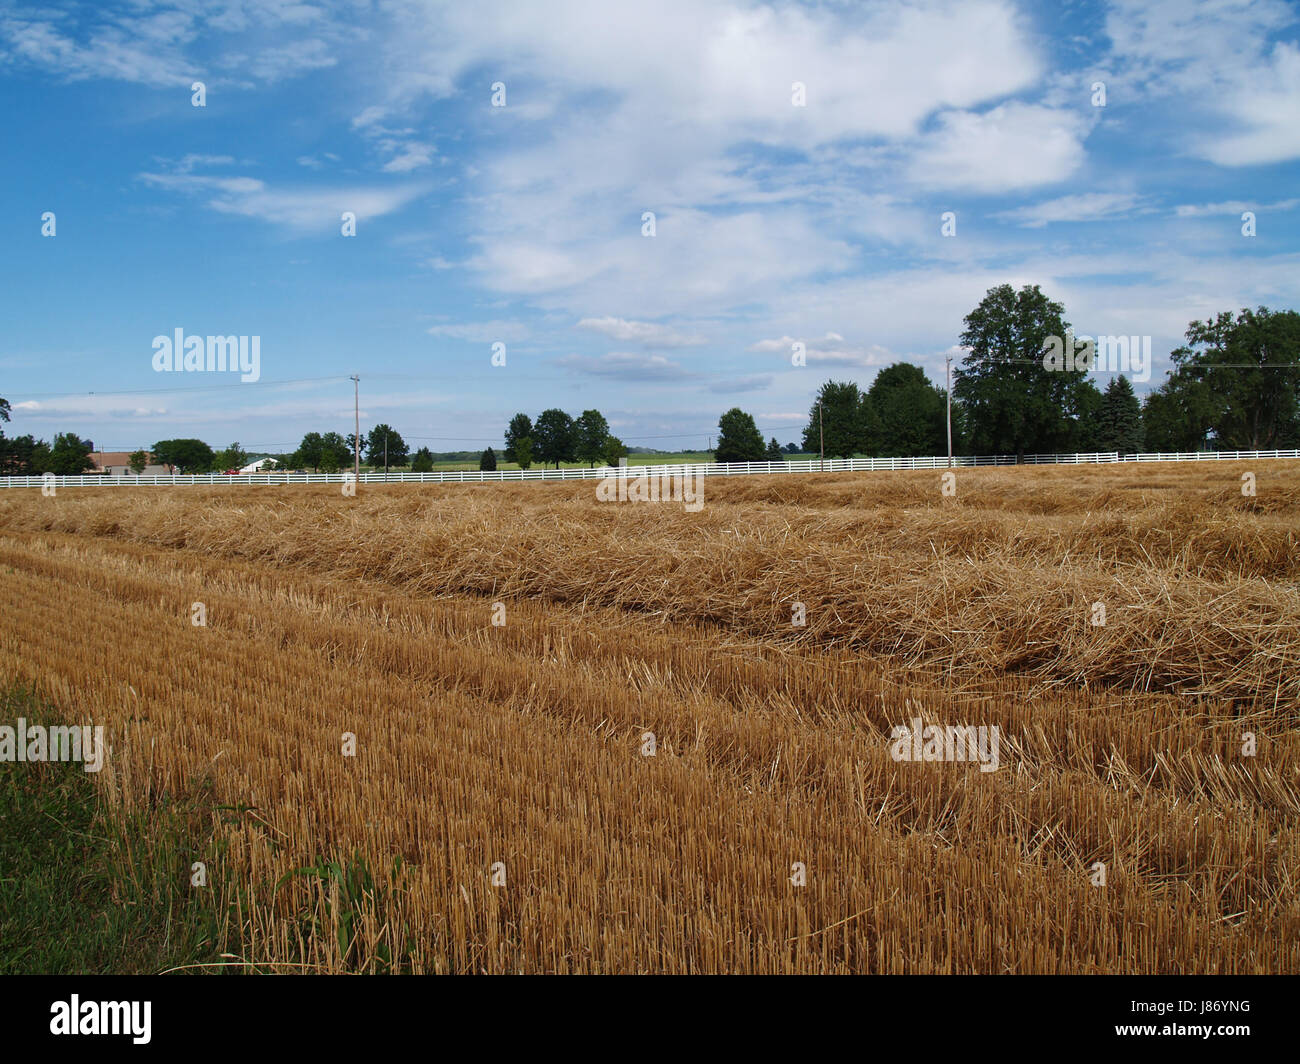 agriculture, farming, field, wheat, farm, straw, agricultural, space, Stock Photo